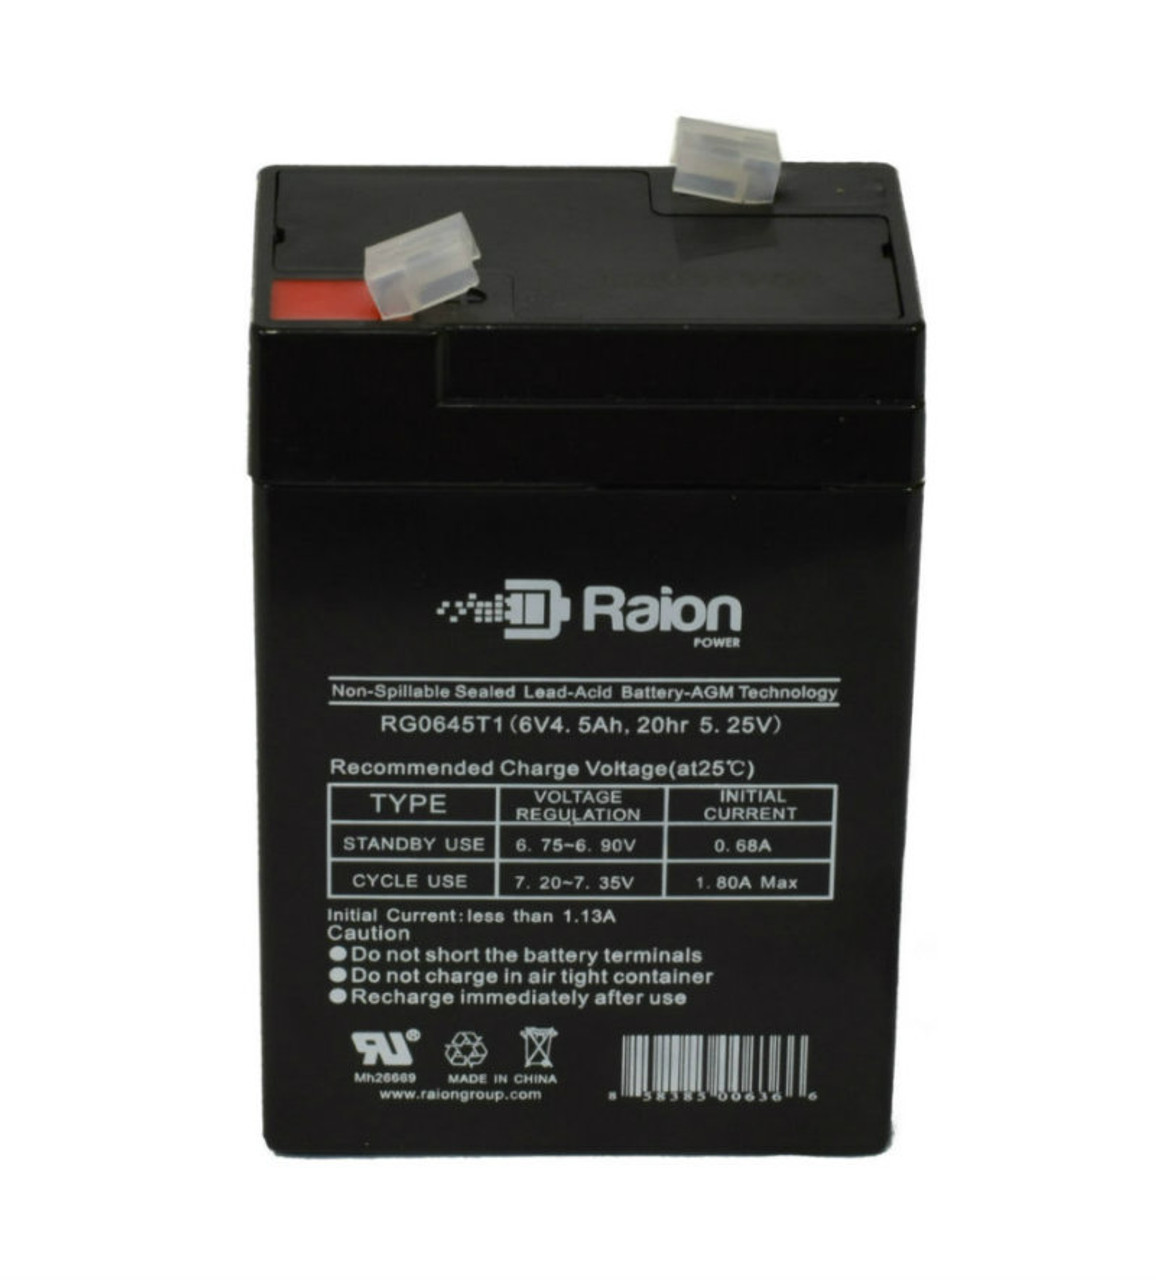 Raion Power RG0645T1 Replacement Battery Cartridge for Peg Perego IGED1173 6V Fiat 500 S Remote Control